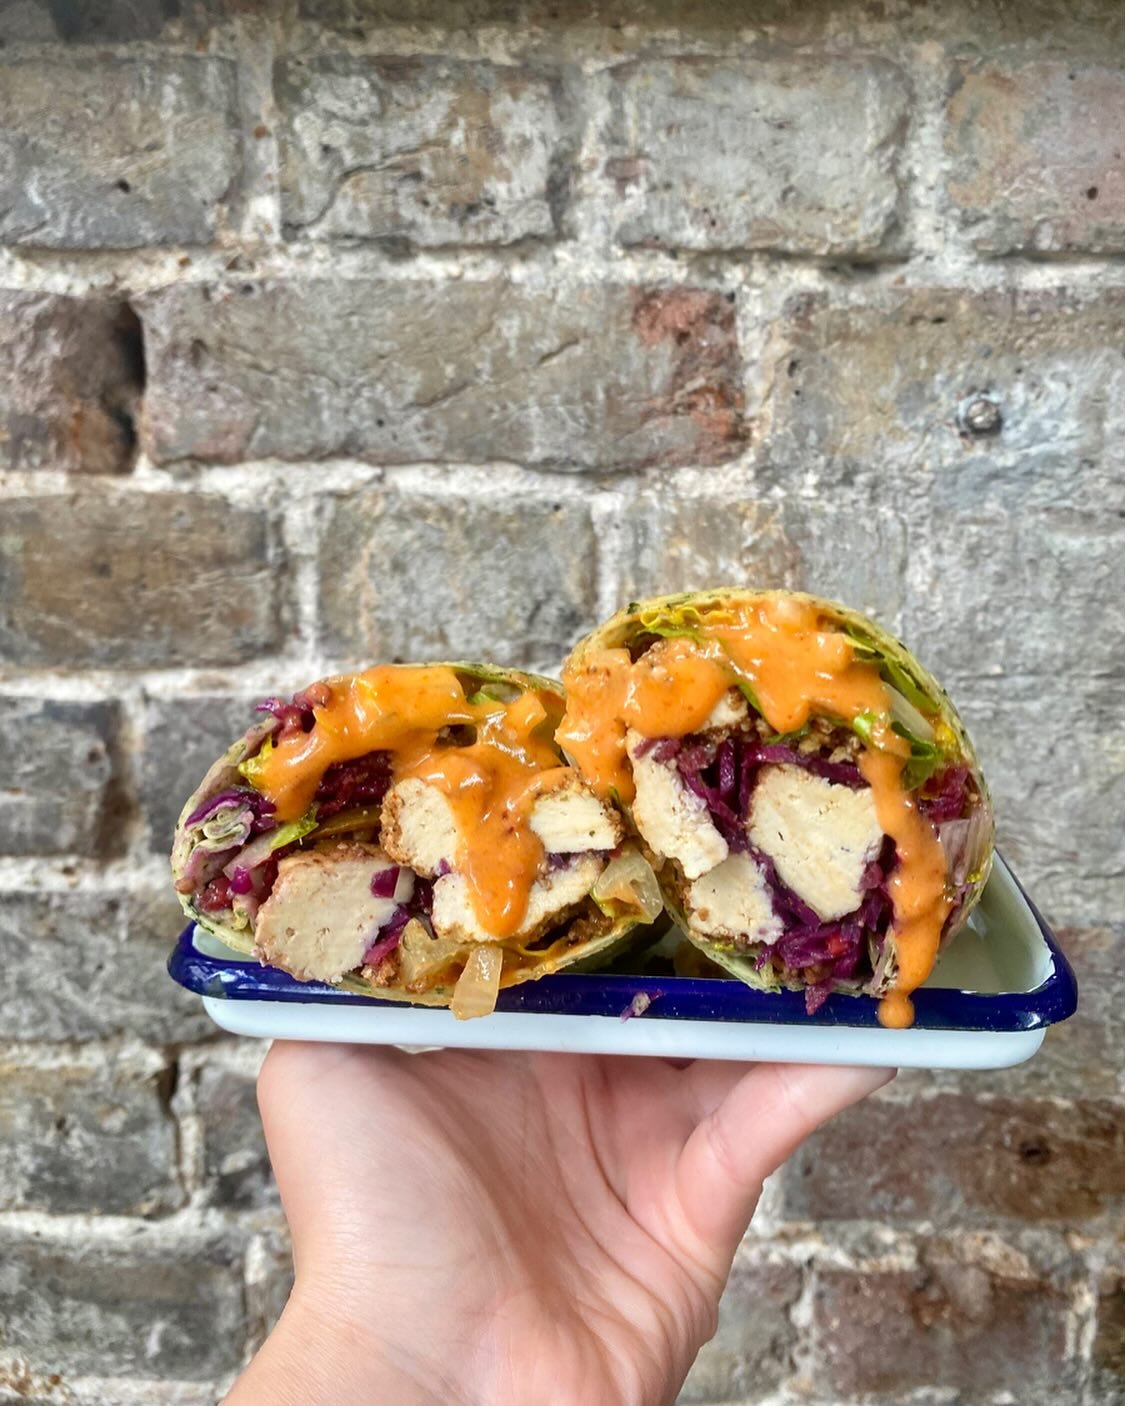 Have you tried our wrap yet? 

Southern roast tofu, a spicy, zingy mayo, creamy coleslaw, lettuce, jalape&ntilde;os and red onion 🤤 so so good come and get it!!
.
.
#vegan #veganlunch #veganlondon #veganwrap